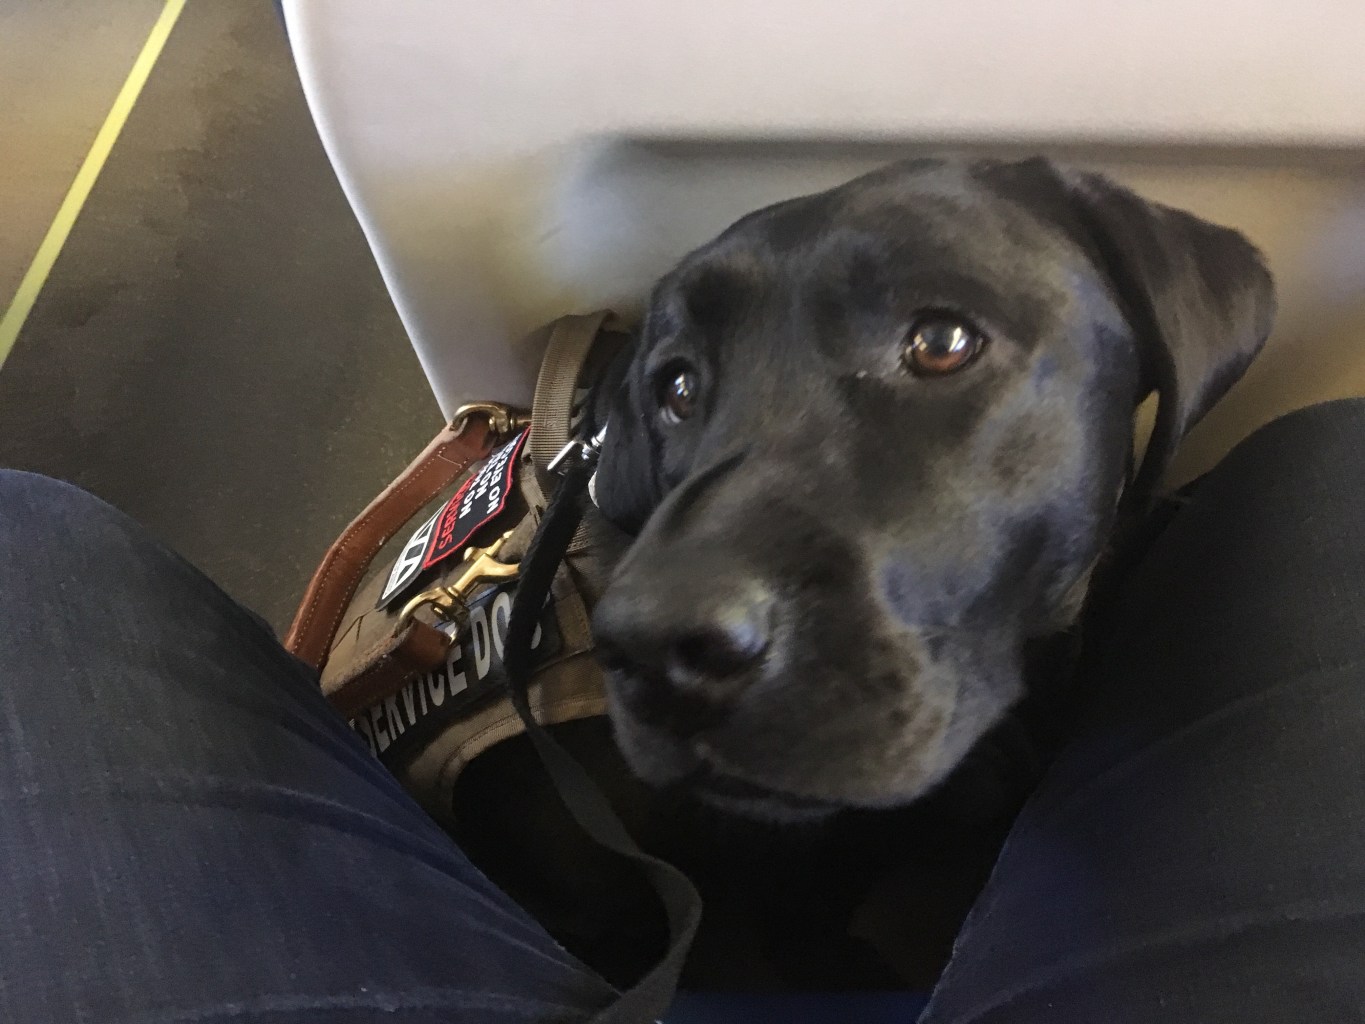 The service dog is seen perched on the floor by the author's legs in a train seat.